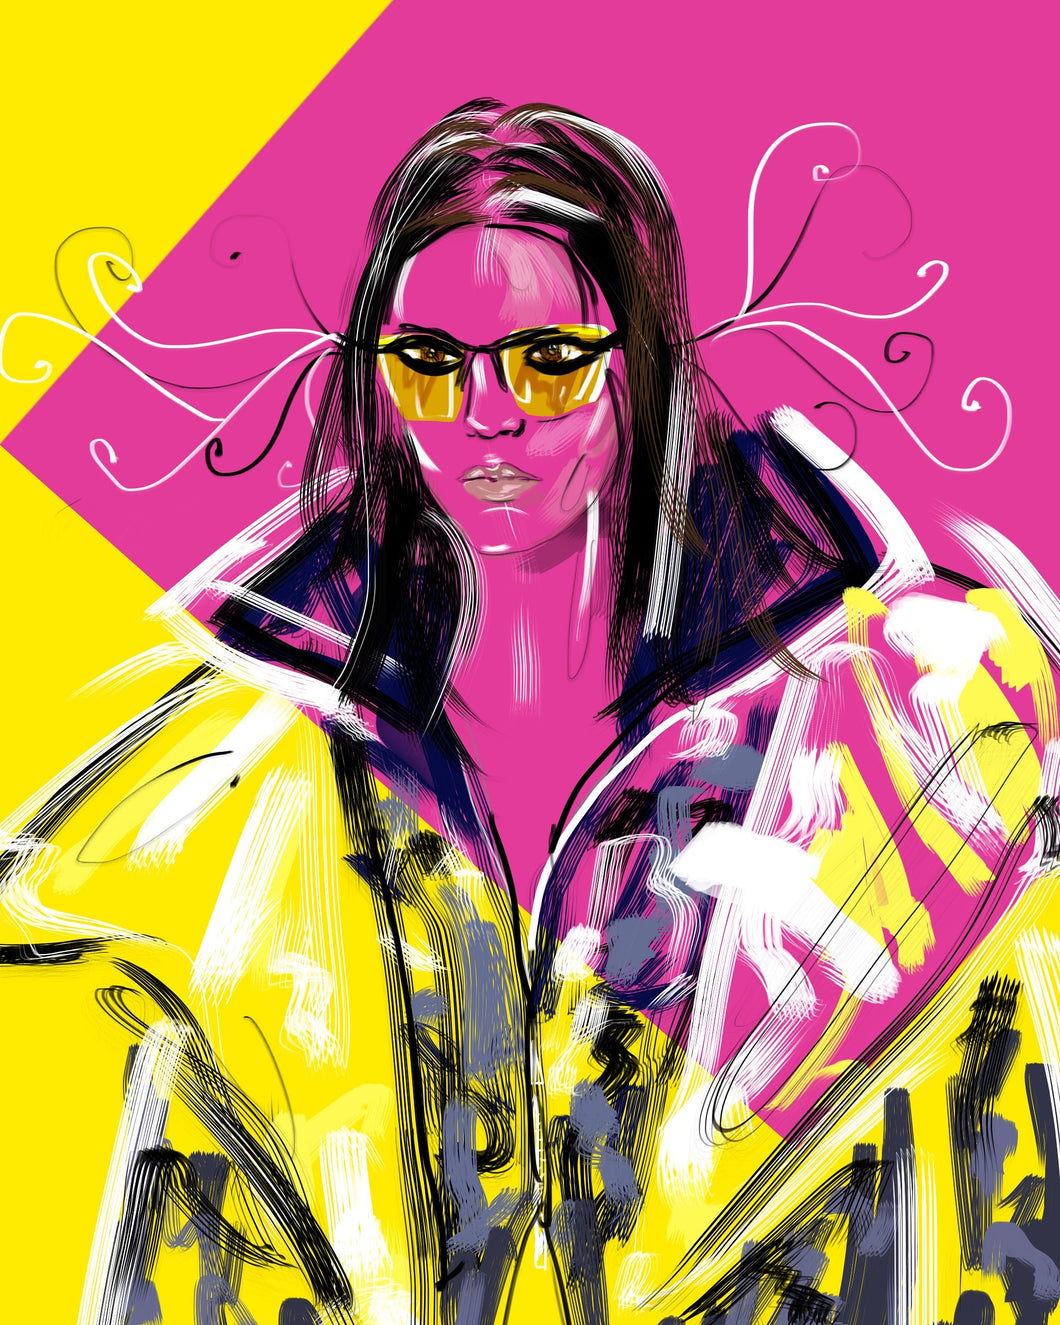 Kendall Jenner in Versace Fashion - Fashion Illustration by Talia Zoref